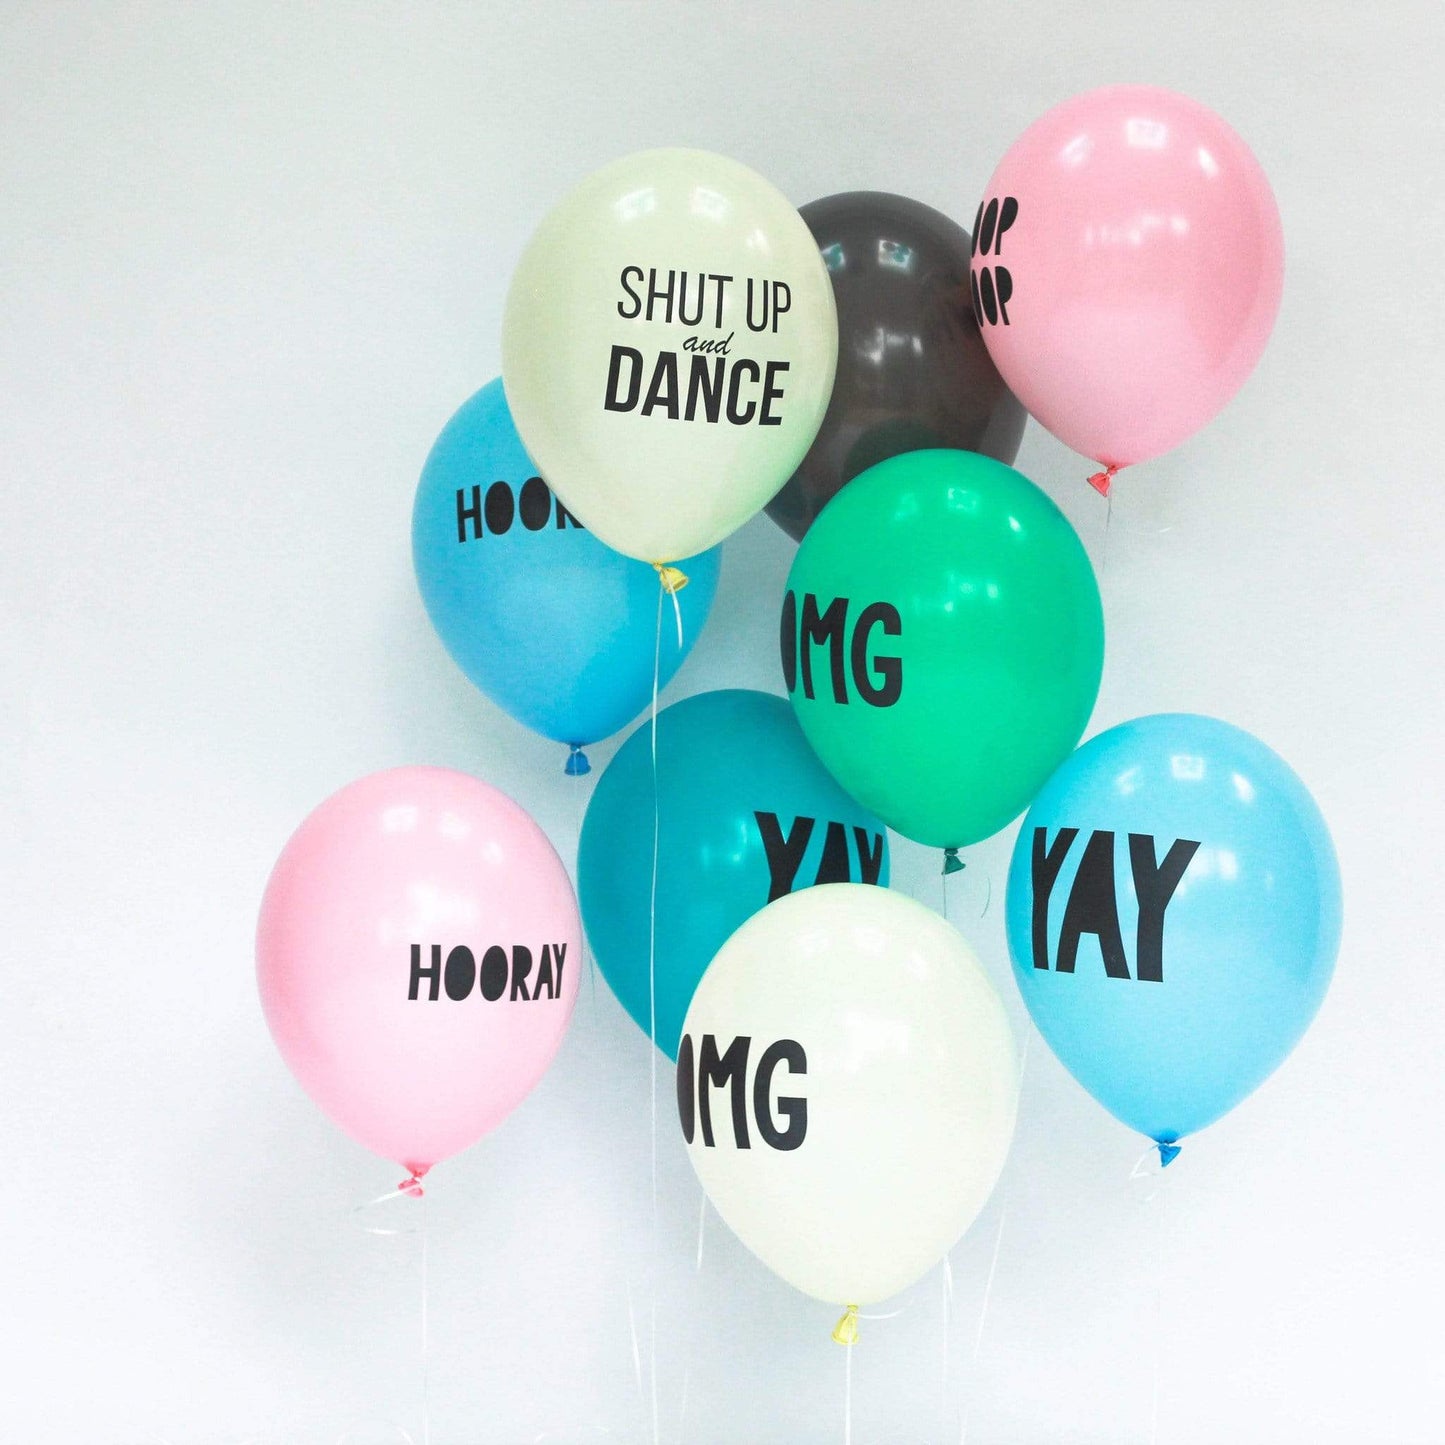 Yay Balloons Blue | Modern Party Balloons | Online Balloonery Pretty Little Party Shop